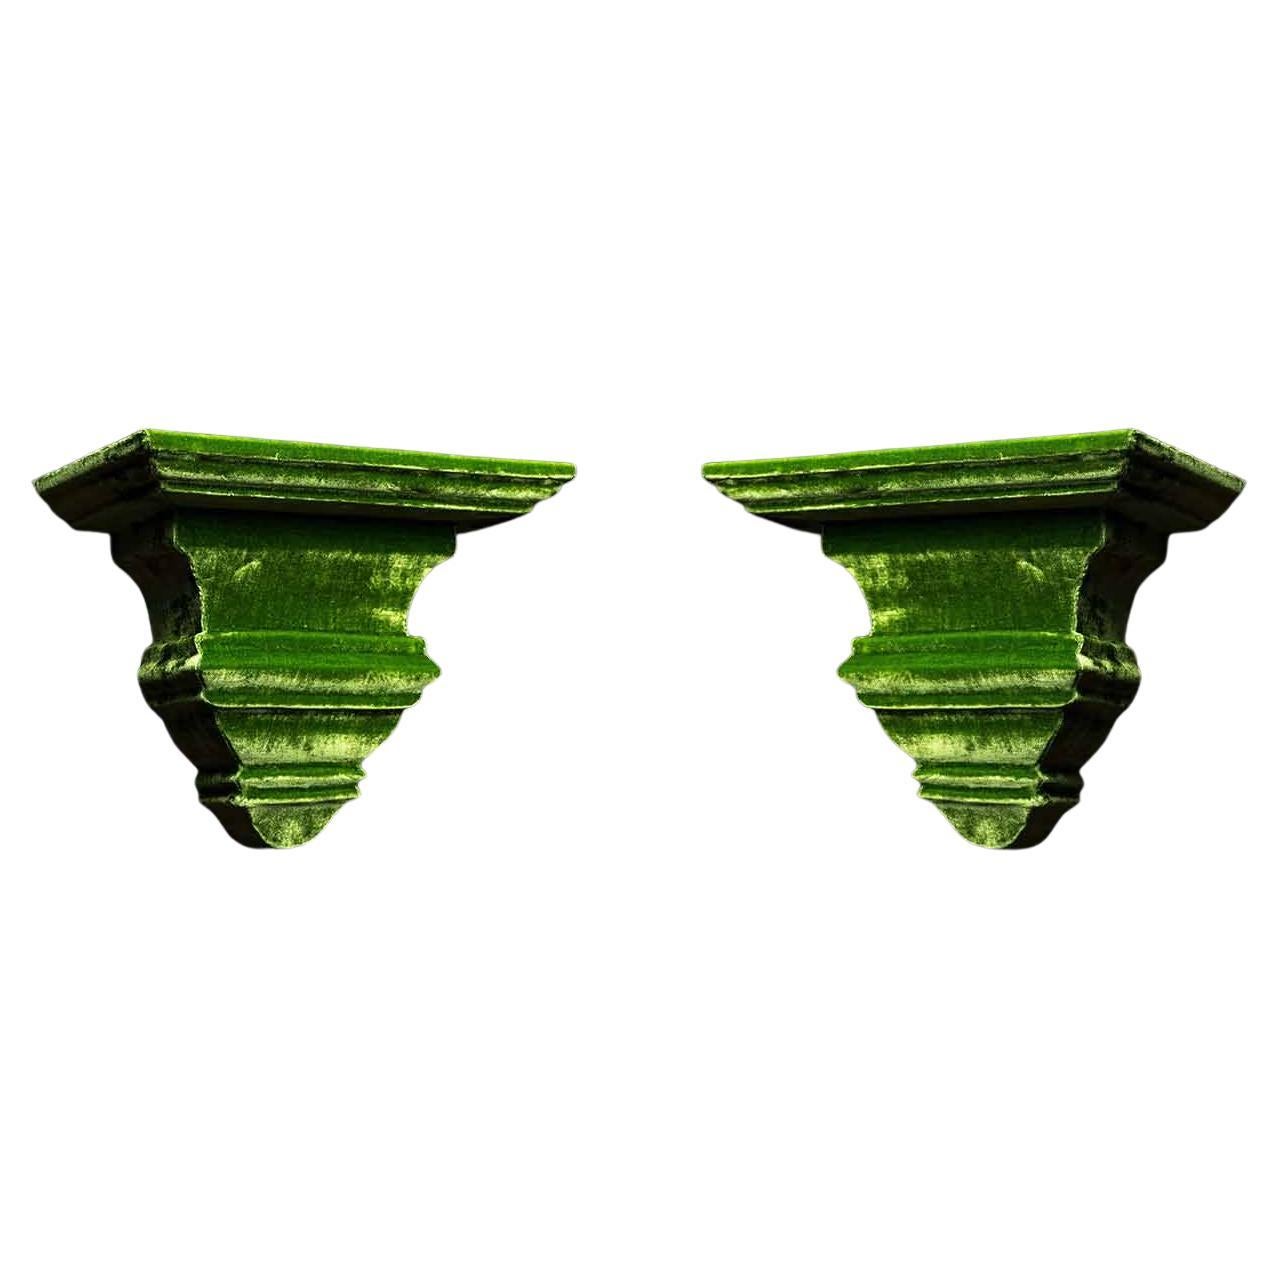 Pair of Green Wall Shelves or Brackets